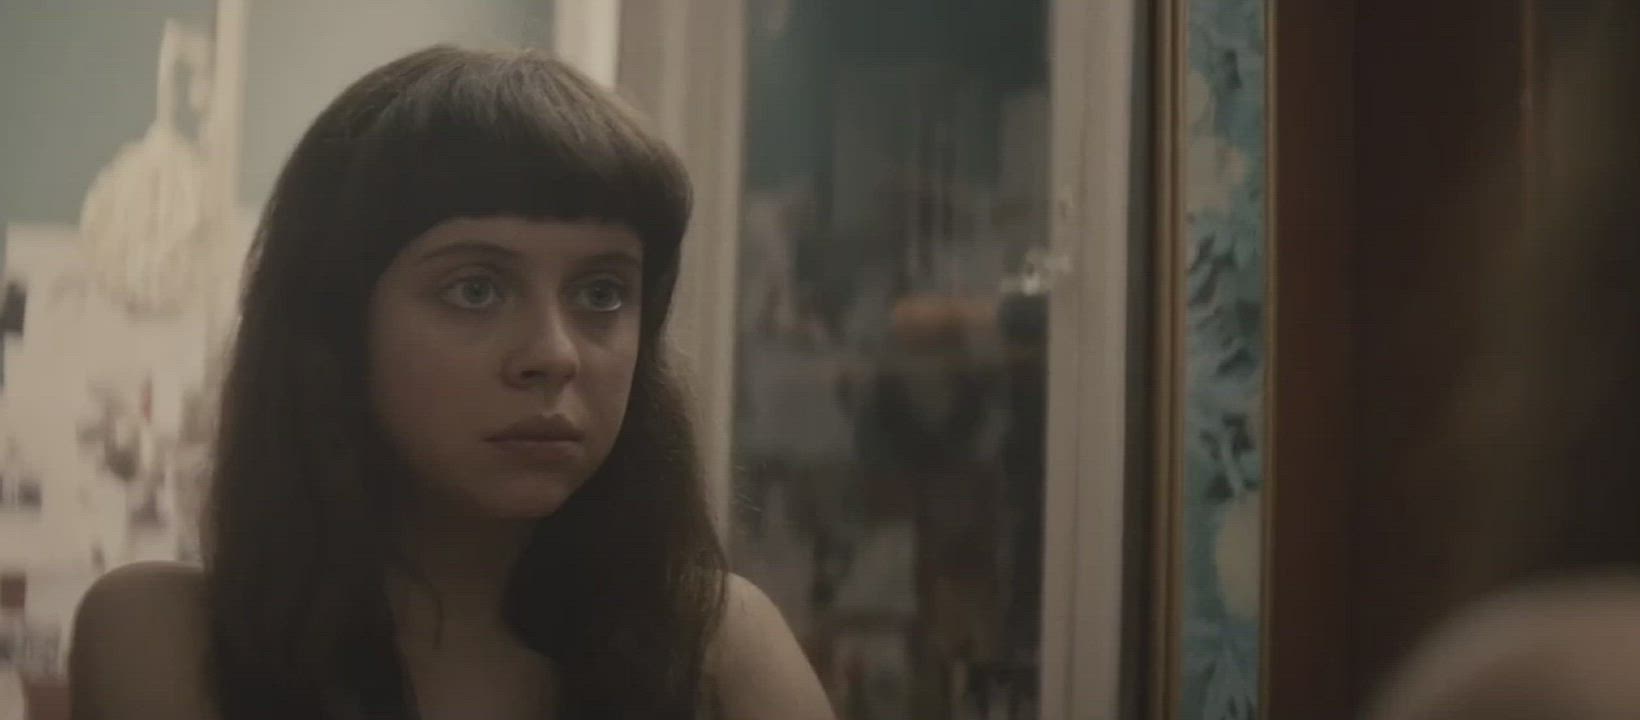 Bel Powley - The Diary Of A Teenage Girl (2015)